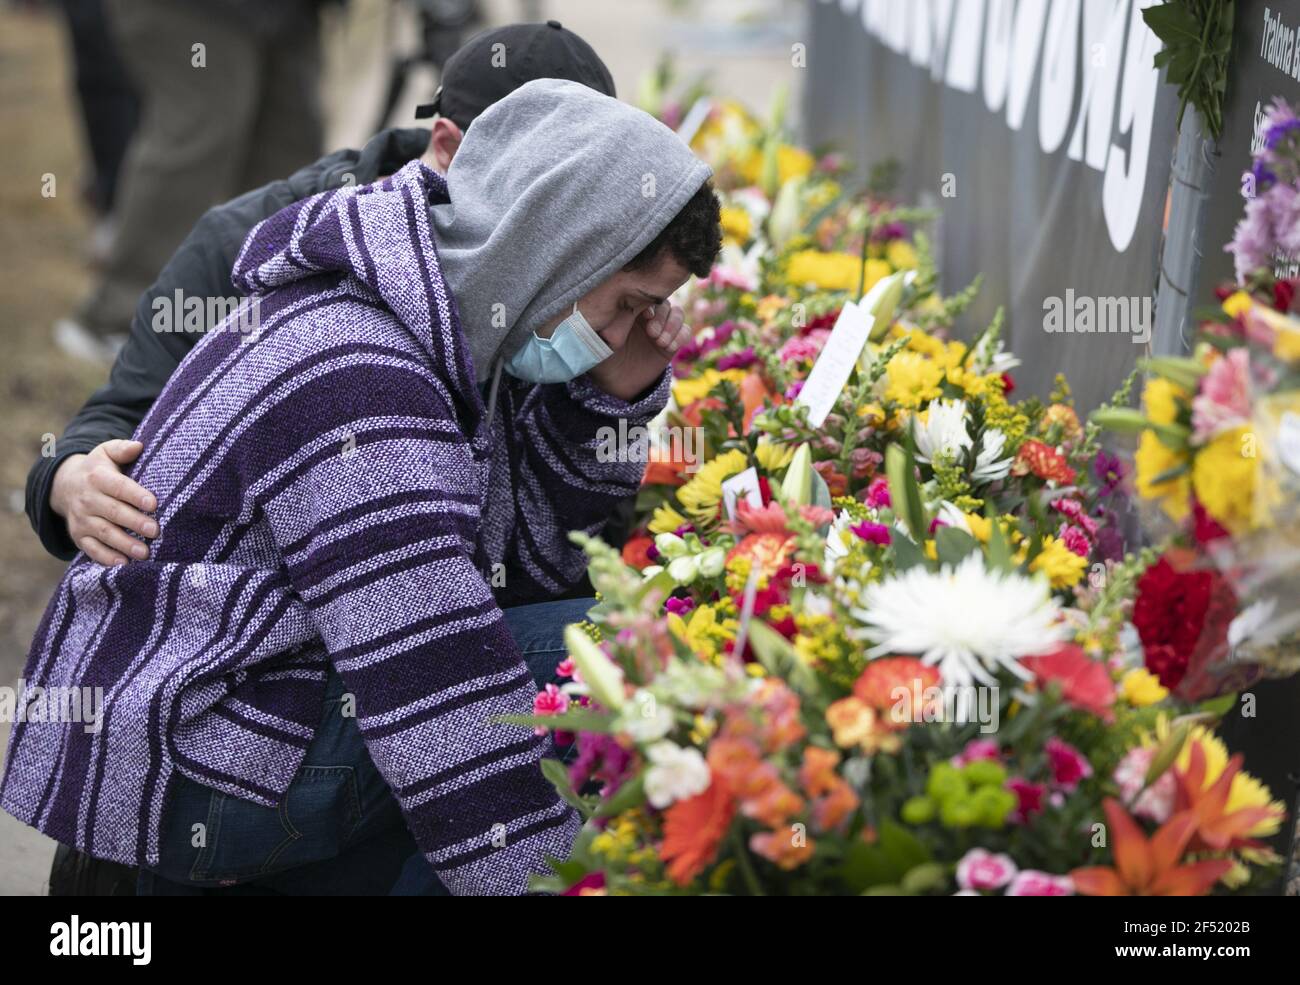 Boulder, United States. 23rd Mar, 2021. A man is comforted after laying flowers outside a King Soopers grocery store where 10 people, including a police officer, were killed in a shooting Monday, in Boulder, Colorado, on Tuesday, March 23, 2021. Police said a suspect, identified as Ahmad Al Aliwi Alissa, was in custody and charged with 10 counts of first-degree murder. Photo by Bob Strong/UPI Credit: UPI/Alamy Live News Stock Photo